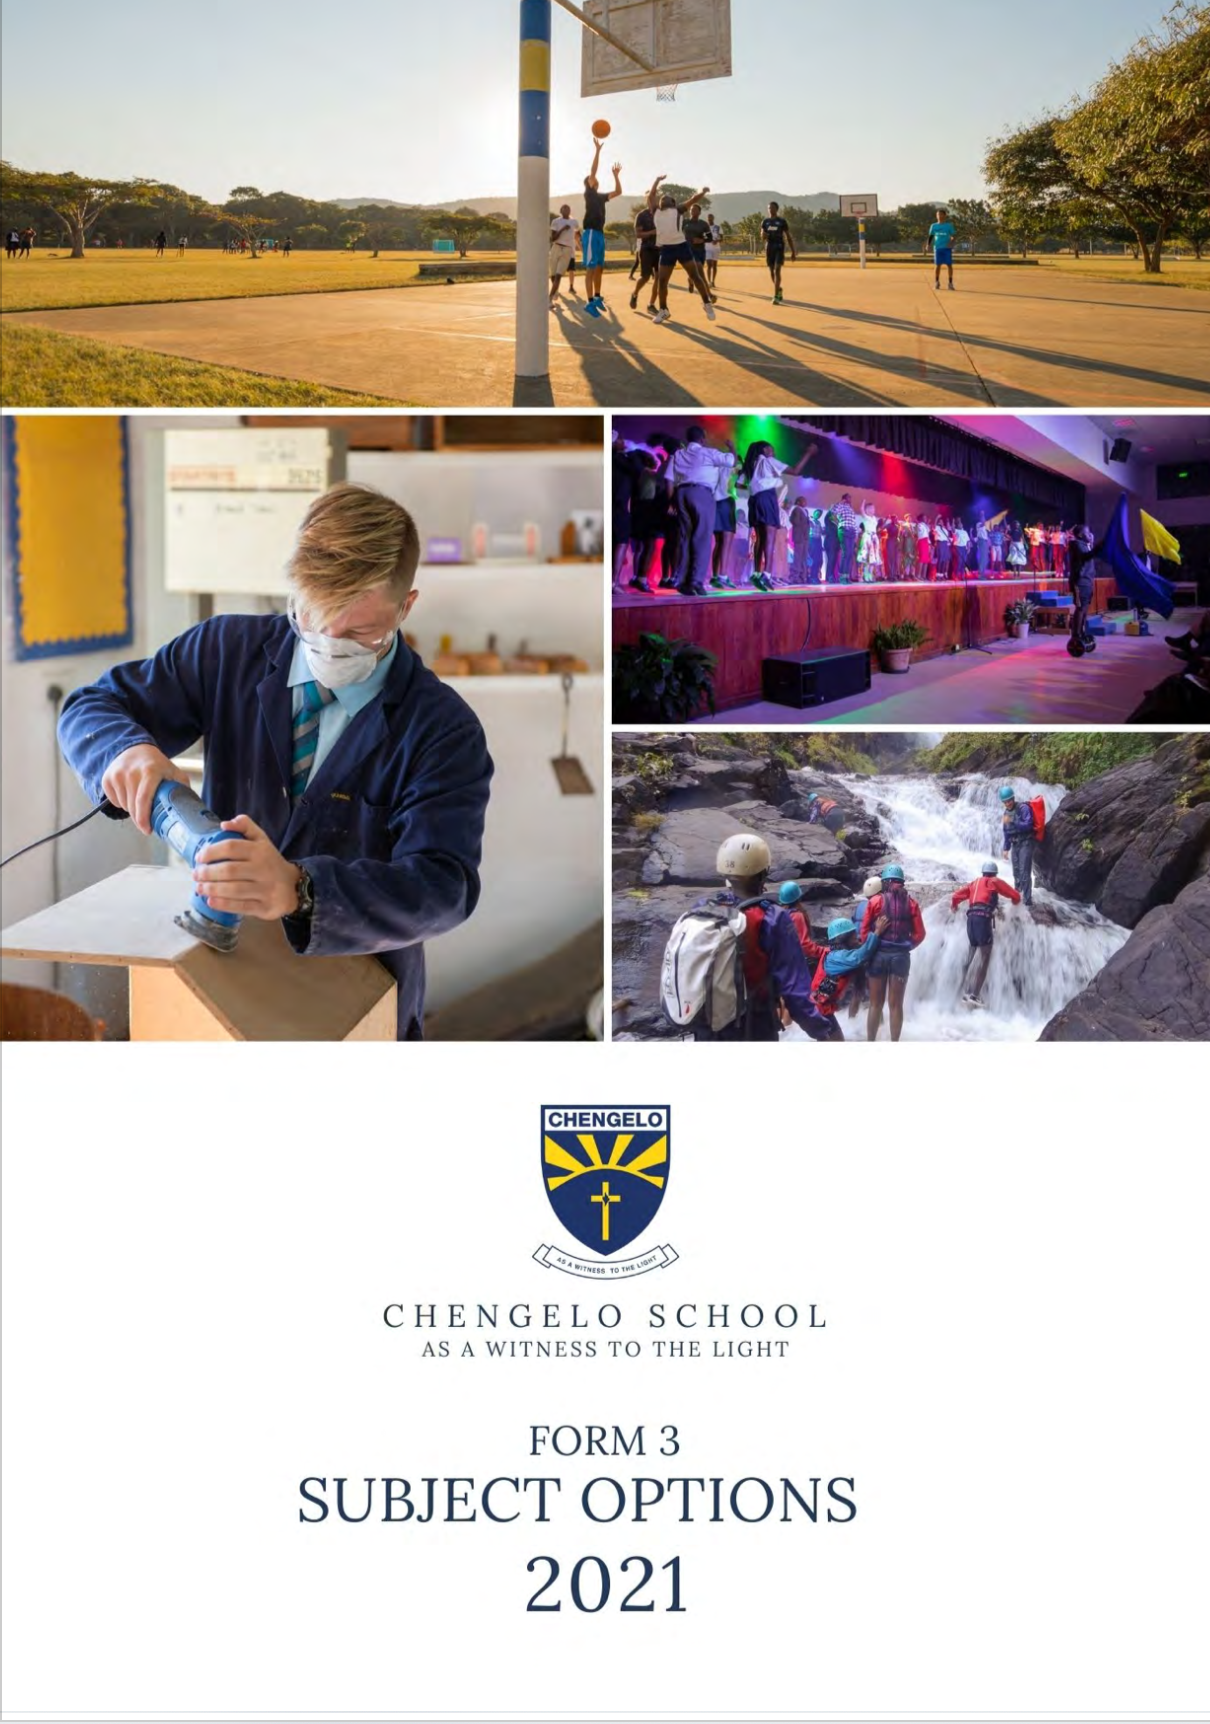 Download the 2021 Form 3 Options Booklet